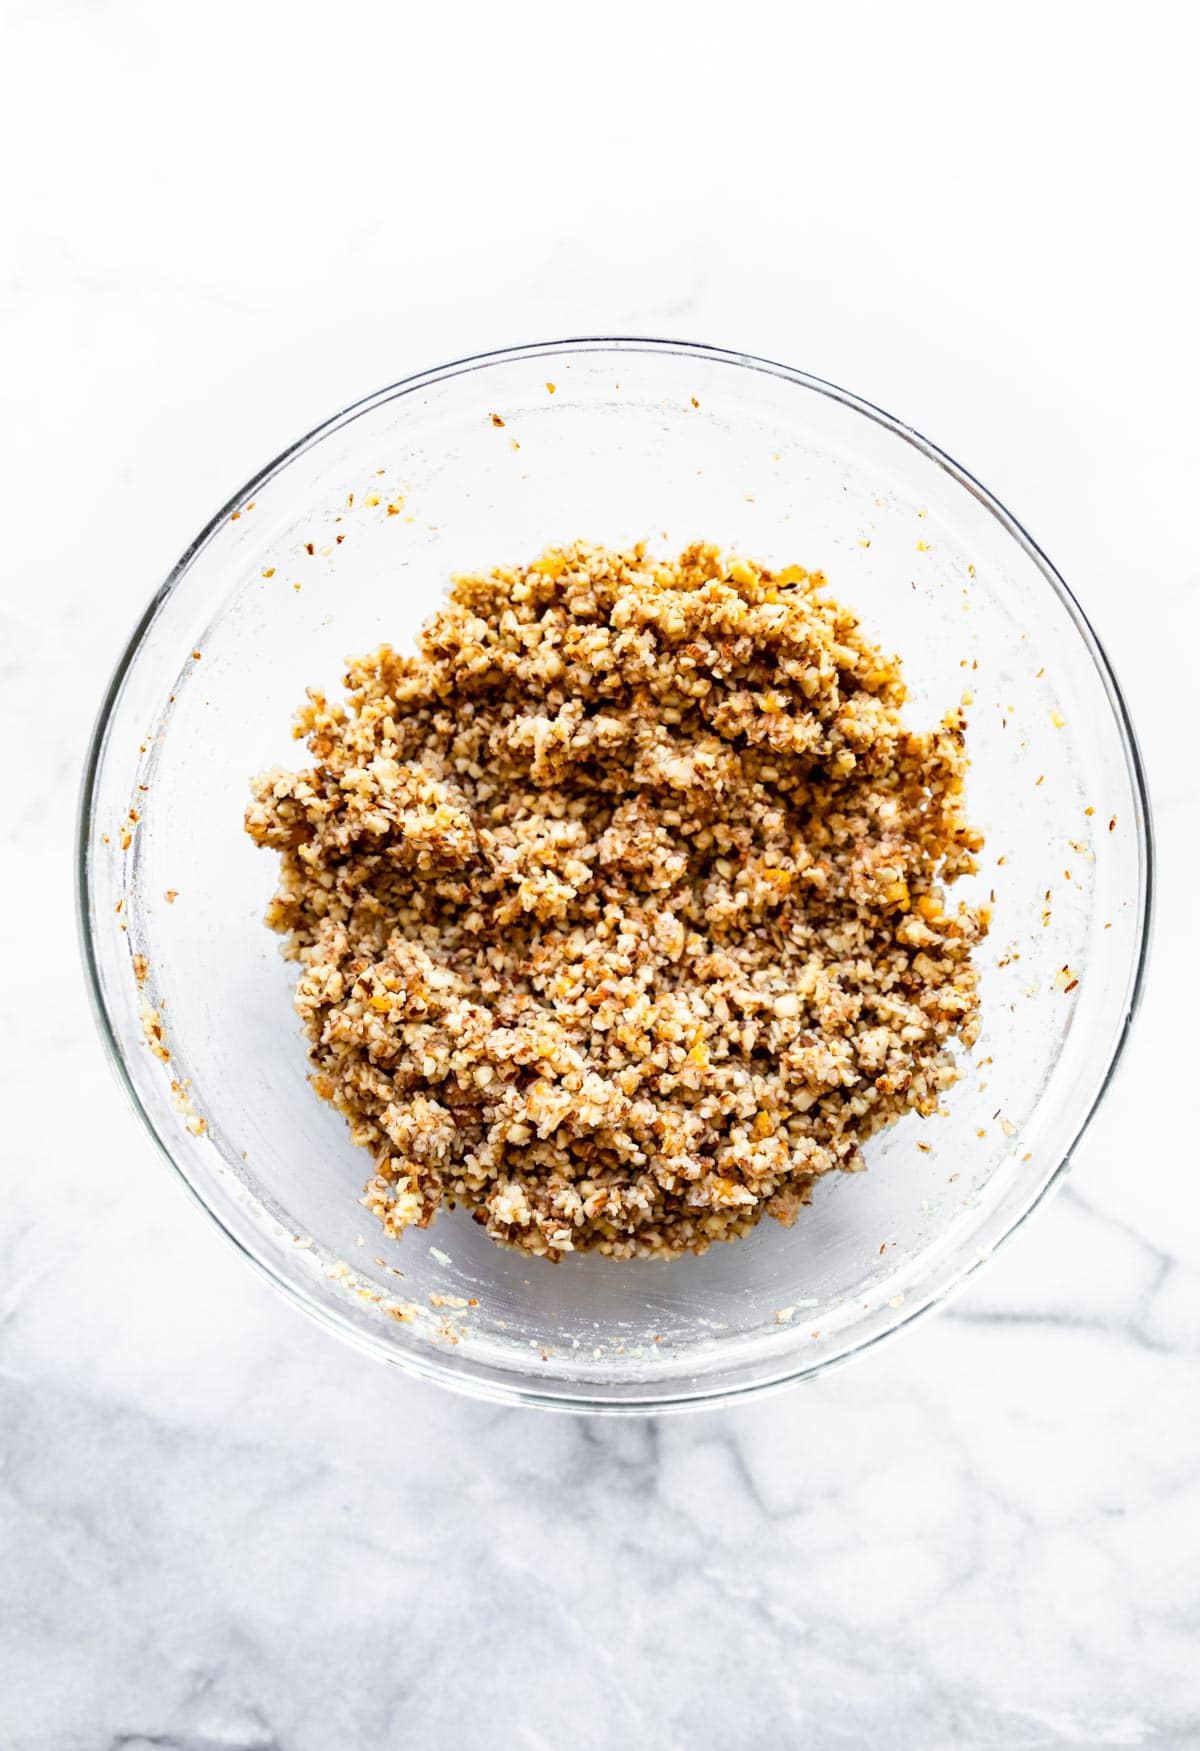 nuts, dried mango, protein powder, and spices in a bowl to make healthy protein bars